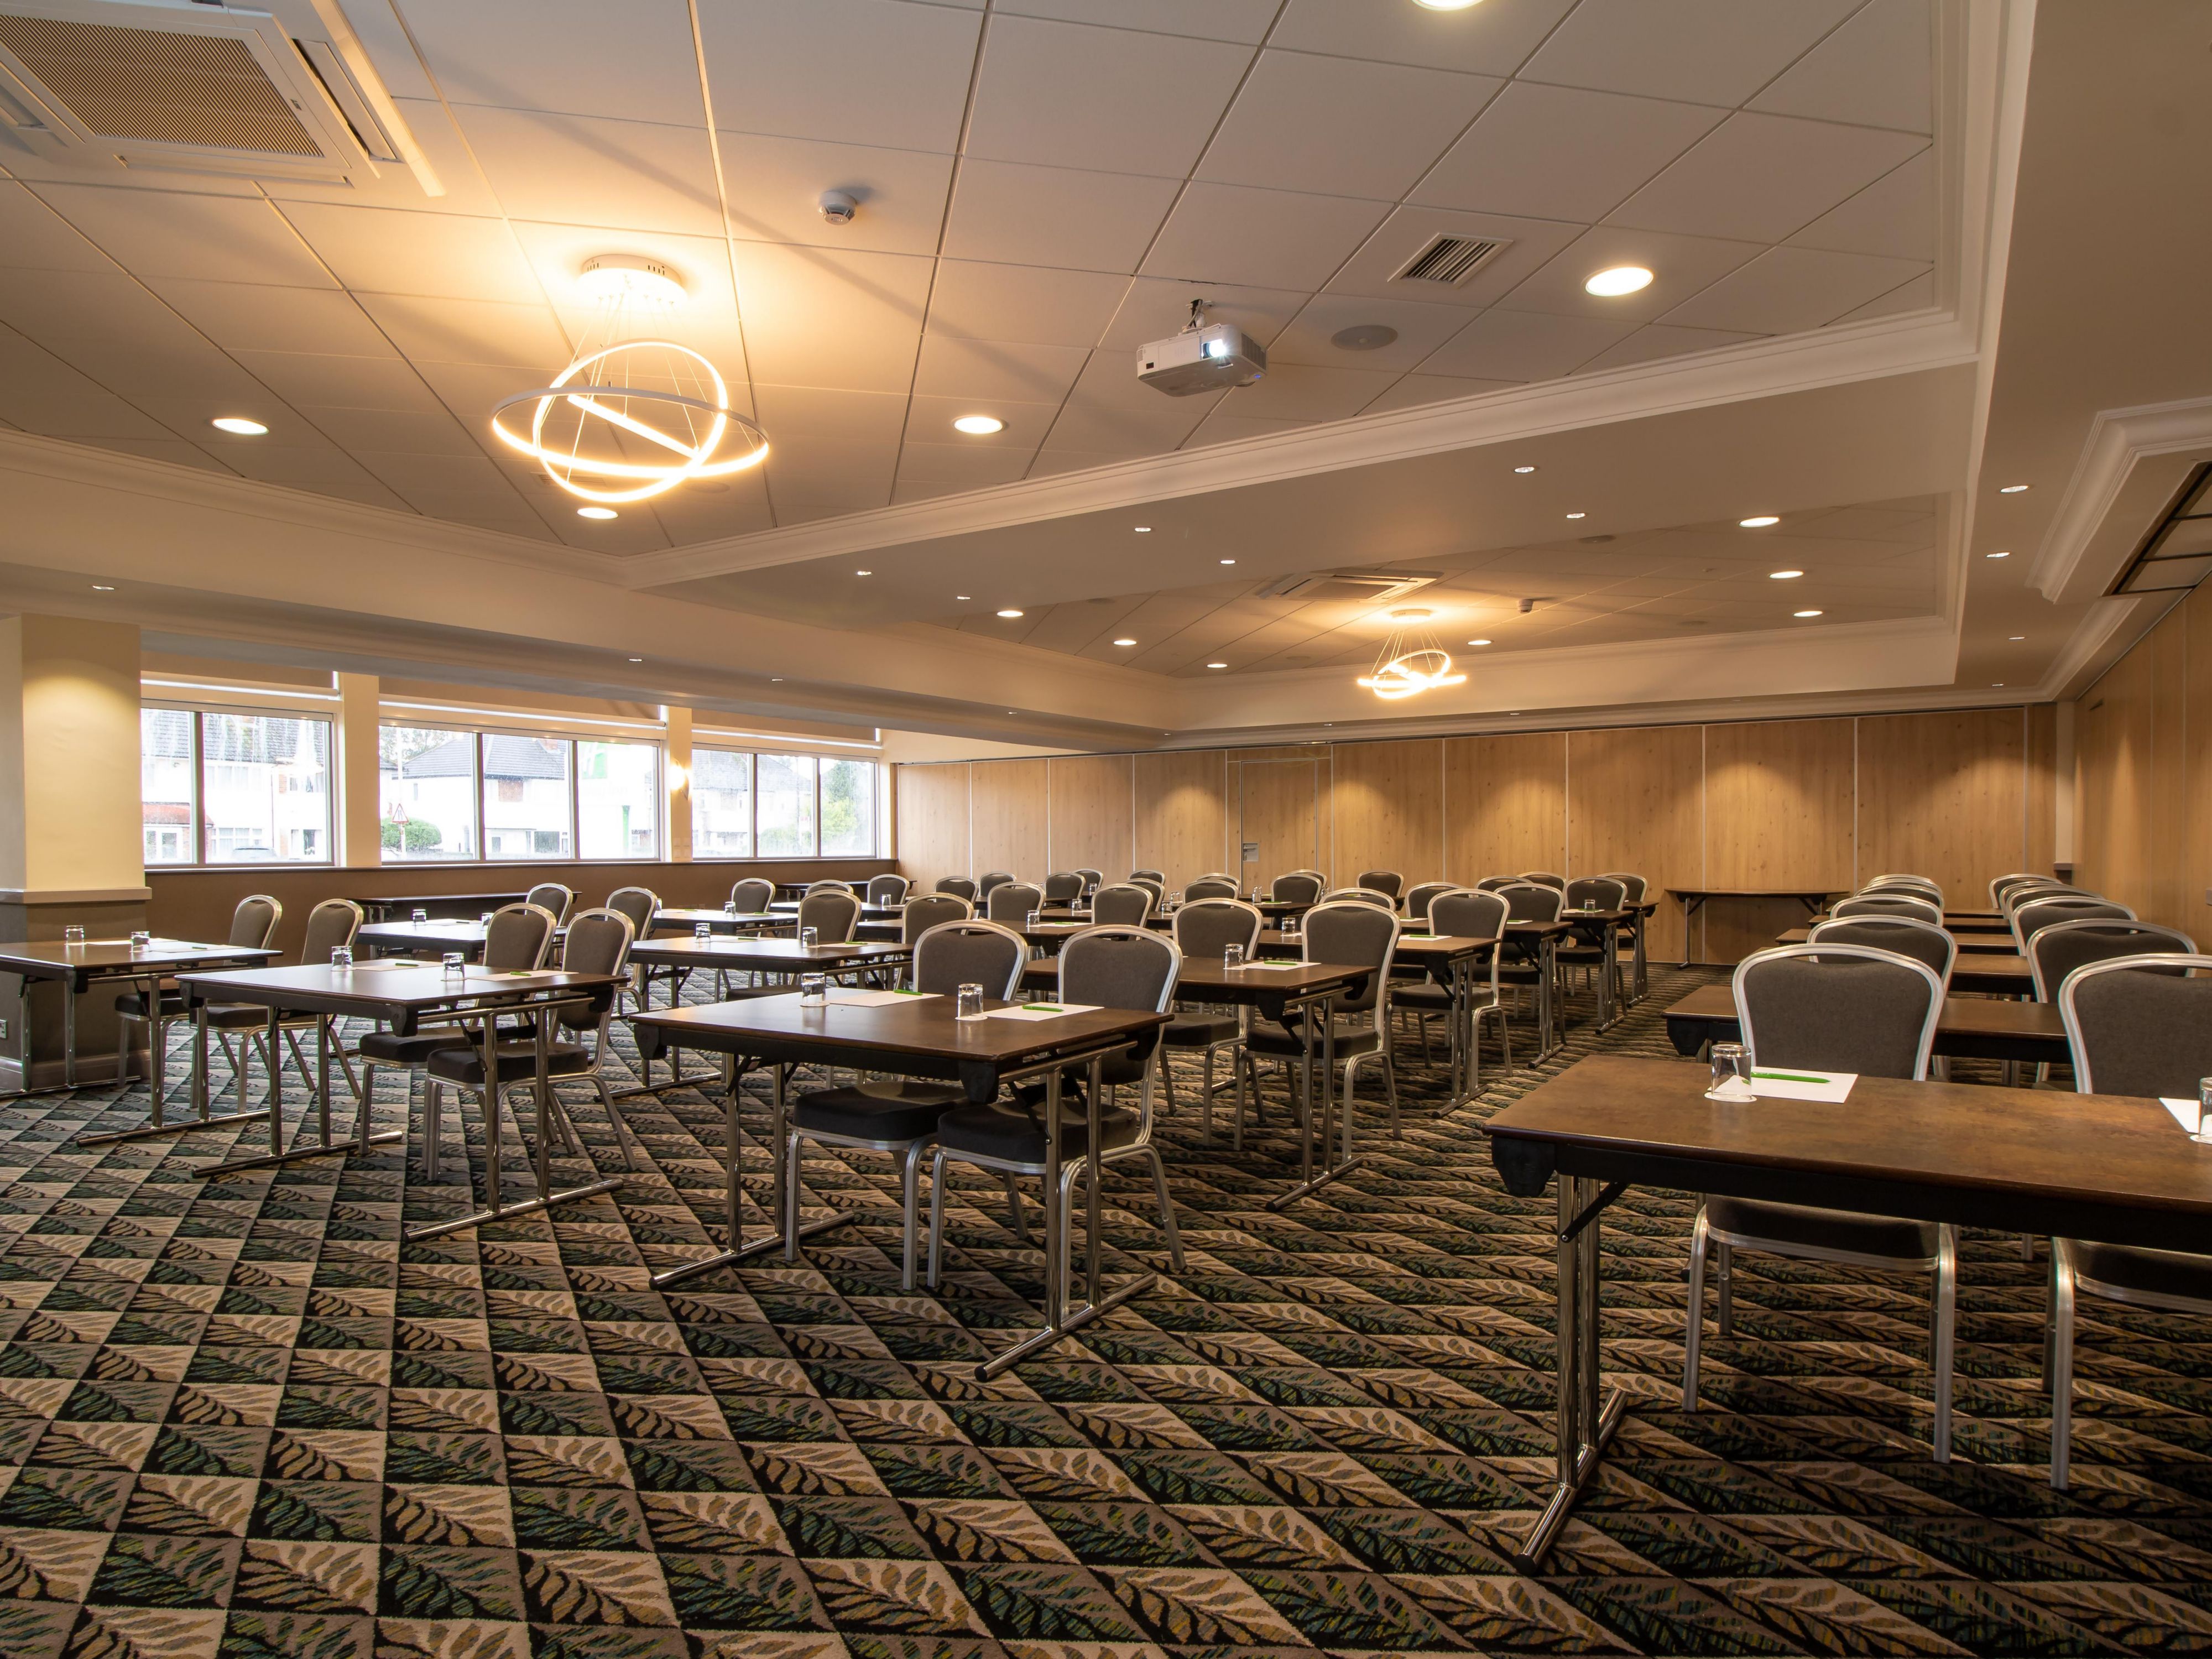 Holiday Inn Leicester Wigston offers five meeting and event spaces for up to 350 delegates. We are perfect for conferences, meetings, parties, weddings, private dinners, anniversaries, celebrations, memorials and any other private hire events.